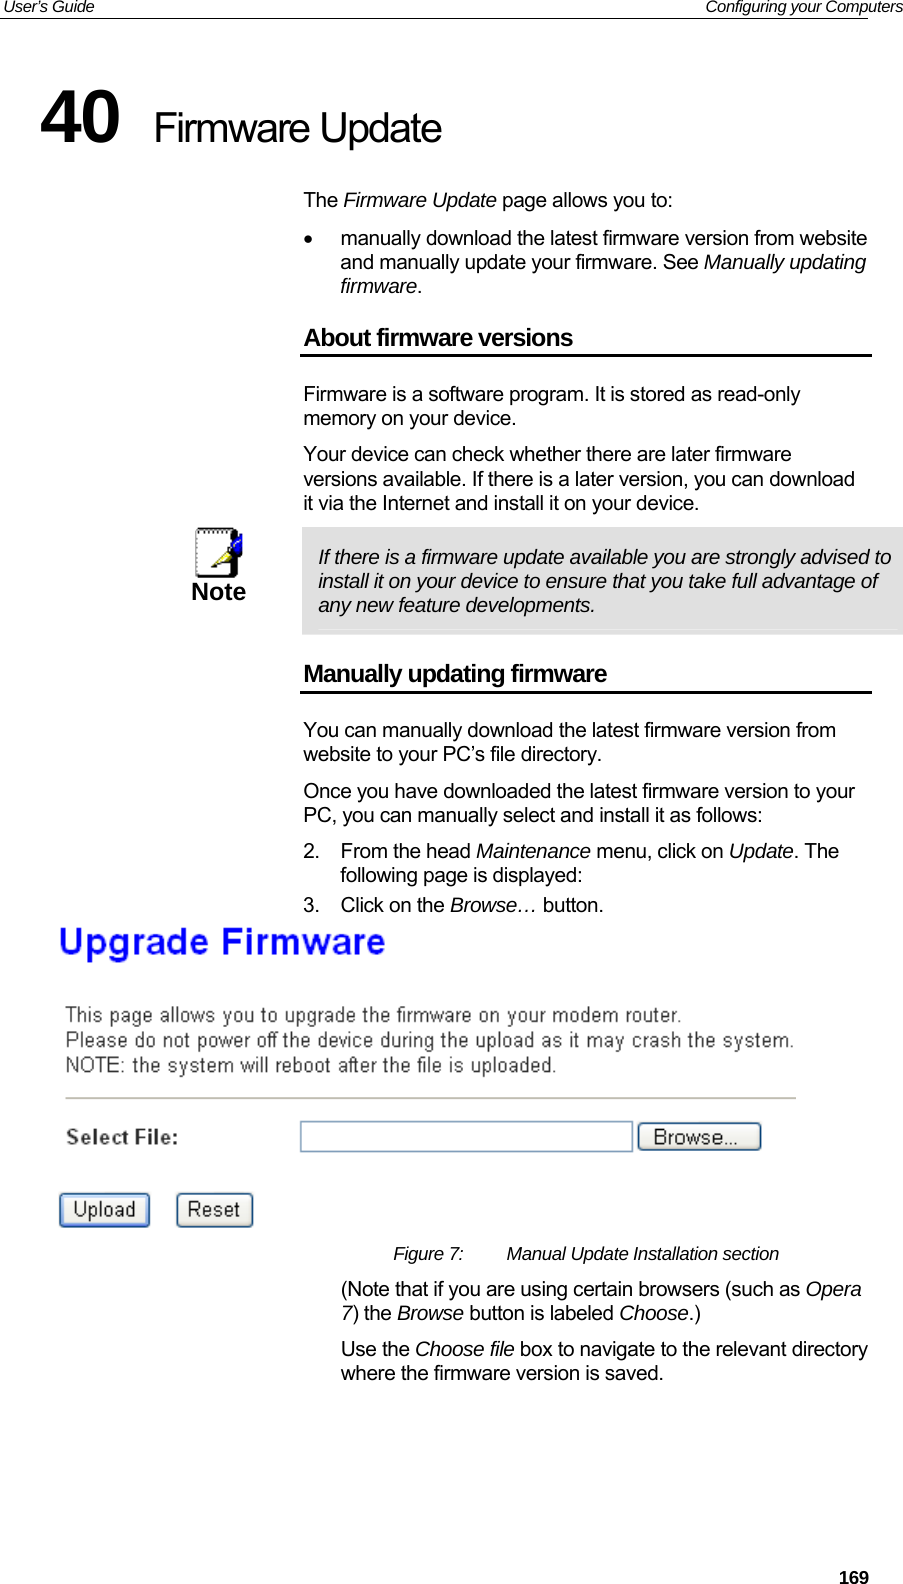 User’s Guide   Configuring your Computers 40  Firmware Update The Firmware Update page allows you to: •  manually download the latest firmware version from website and manually update your firmware. See Manually updating firmware. About firmware versions Firmware is a software program. It is stored as read-only memory on your device. Your device can check whether there are later firmware versions available. If there is a later version, you can download it via the Internet and install it on your device.  Note  If there is a firmware update available you are strongly advised to install it on your device to ensure that you take full advantage of any new feature developments. Manually updating firmware You can manually download the latest firmware version from website to your PC’s file directory.  Once you have downloaded the latest firmware version to your PC, you can manually select and install it as follows: 2. From the head Maintenance menu, click on Update. The following page is displayed: 3.  Click on the Browse… button.   Figure 7:  Manual Update Installation section (Note that if you are using certain browsers (such as Opera 7) the Browse button is labeled Choose.) Use the Choose file box to navigate to the relevant directory where the firmware version is saved.     169